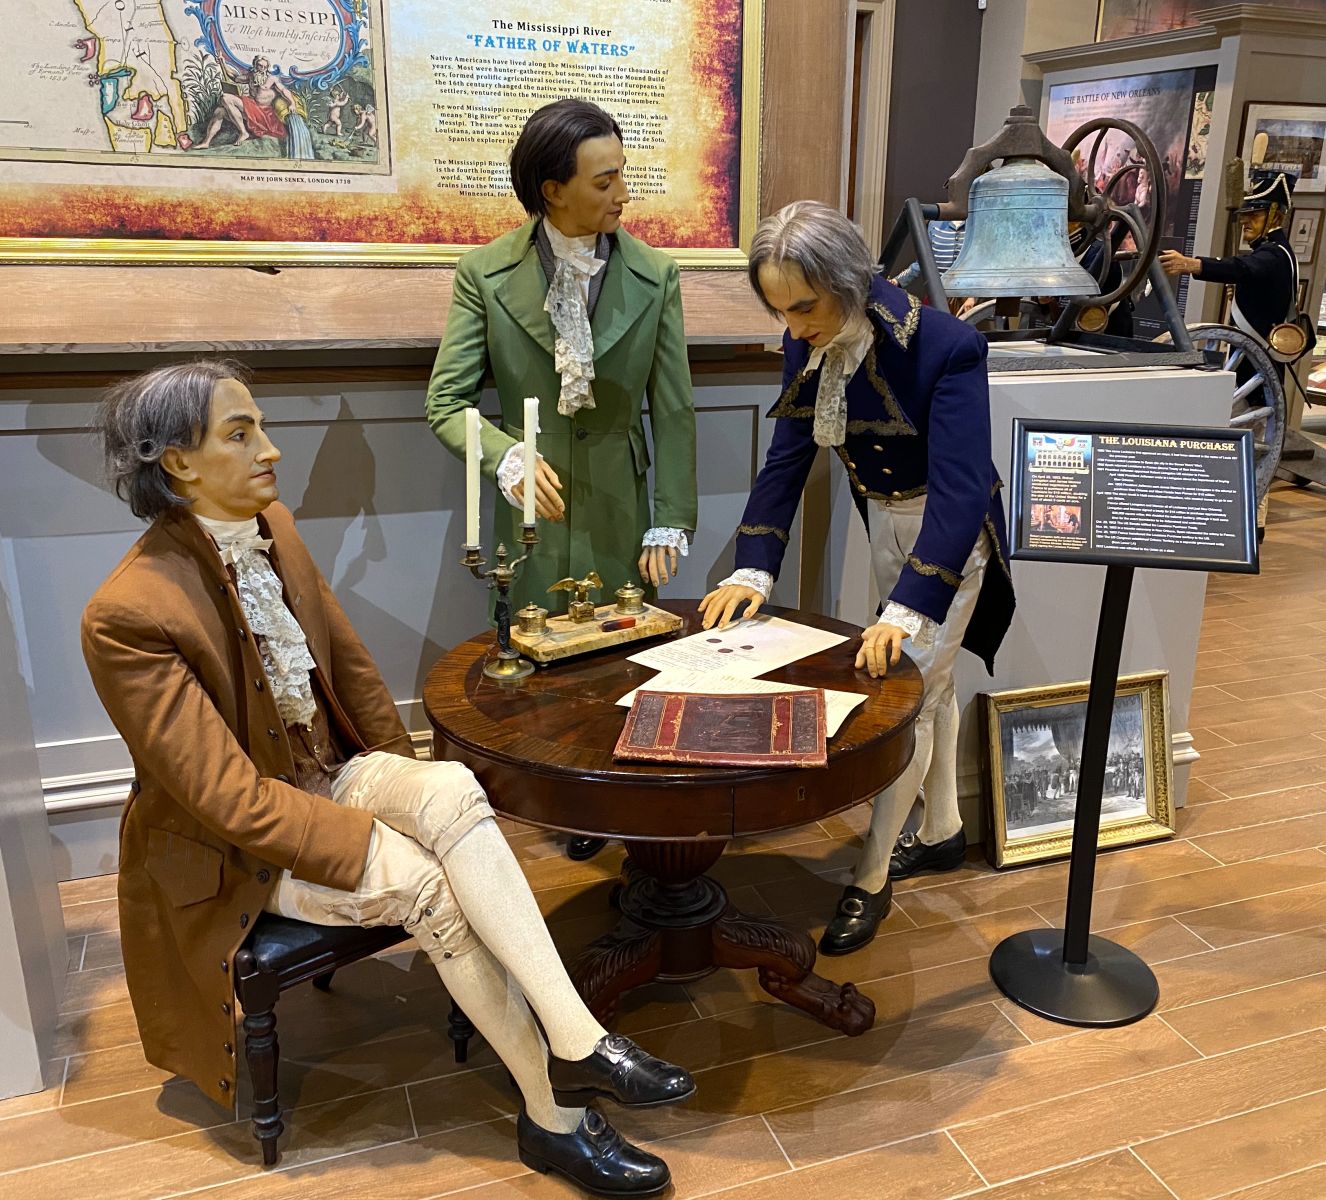 Musée Conti Wax Museum Figures Find New Home